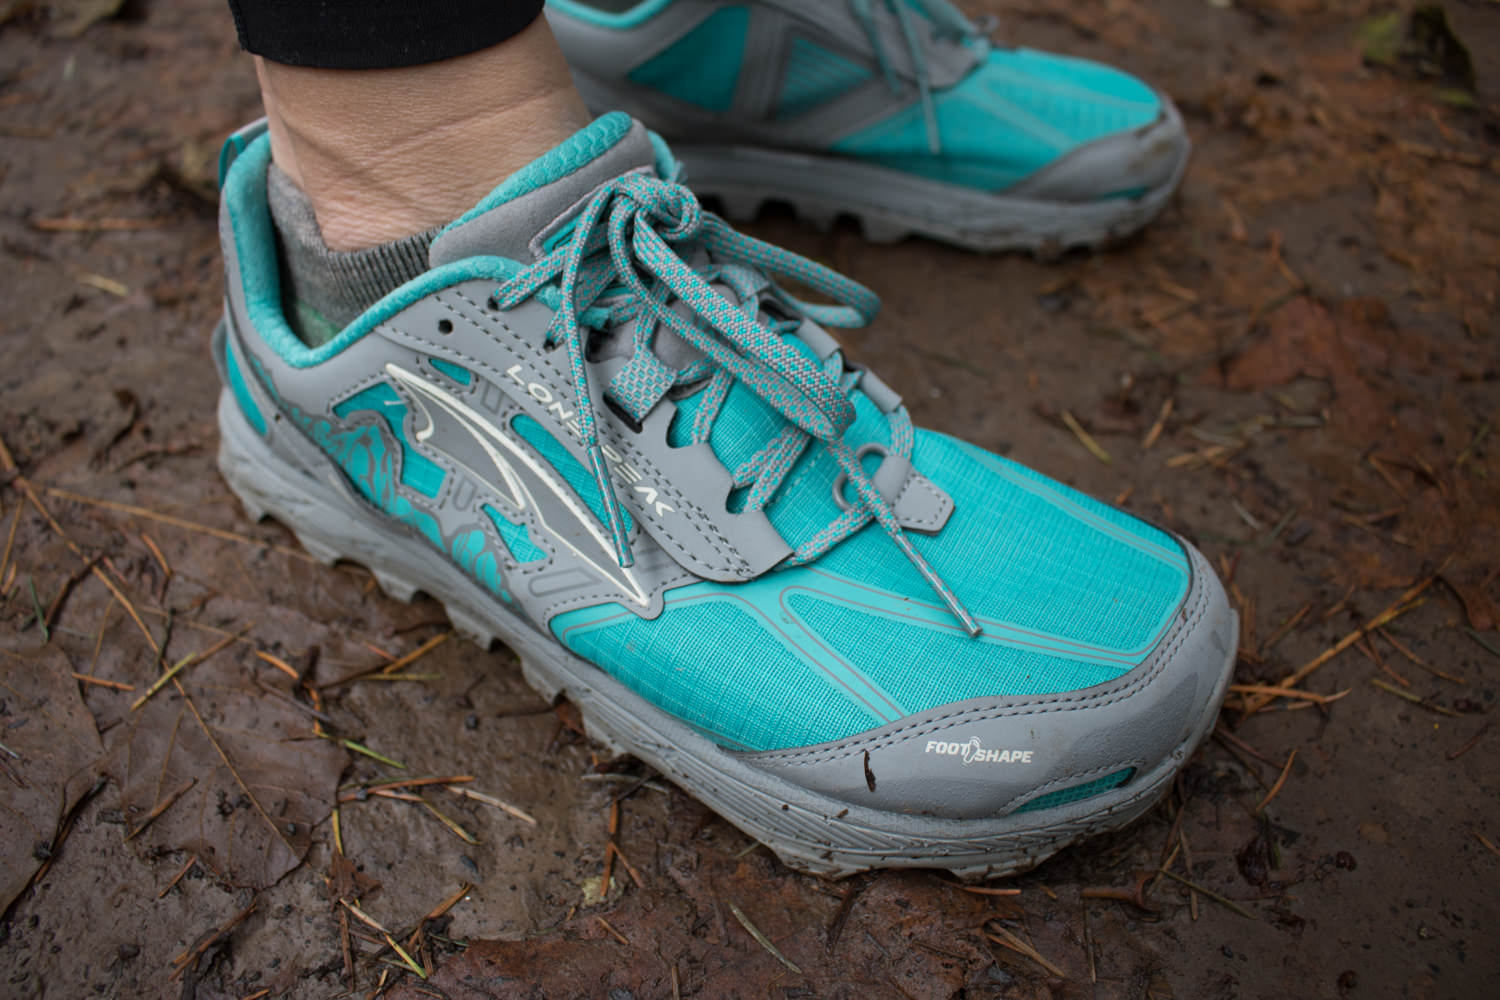 Closeup view of a hiker's feet in the Altra Lone Peak 4 Hiking Shoes